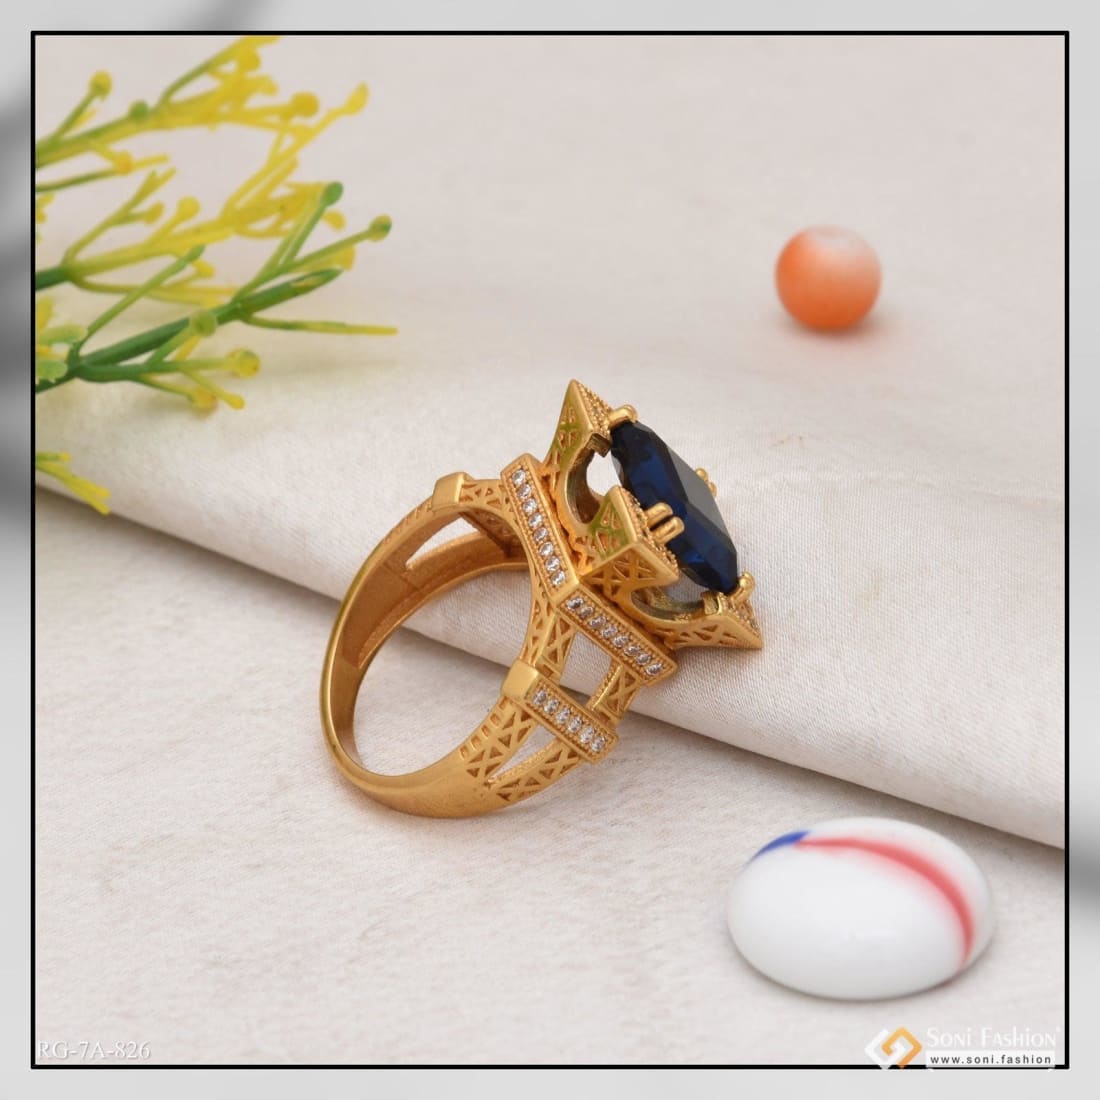 Men's Large Rectangle CZ Dark Blue Stone Ring Wide Wedding Engagement Band  Gold Plated Ice Out Rings RA408 (Blue,Size 8) - Walmart.com